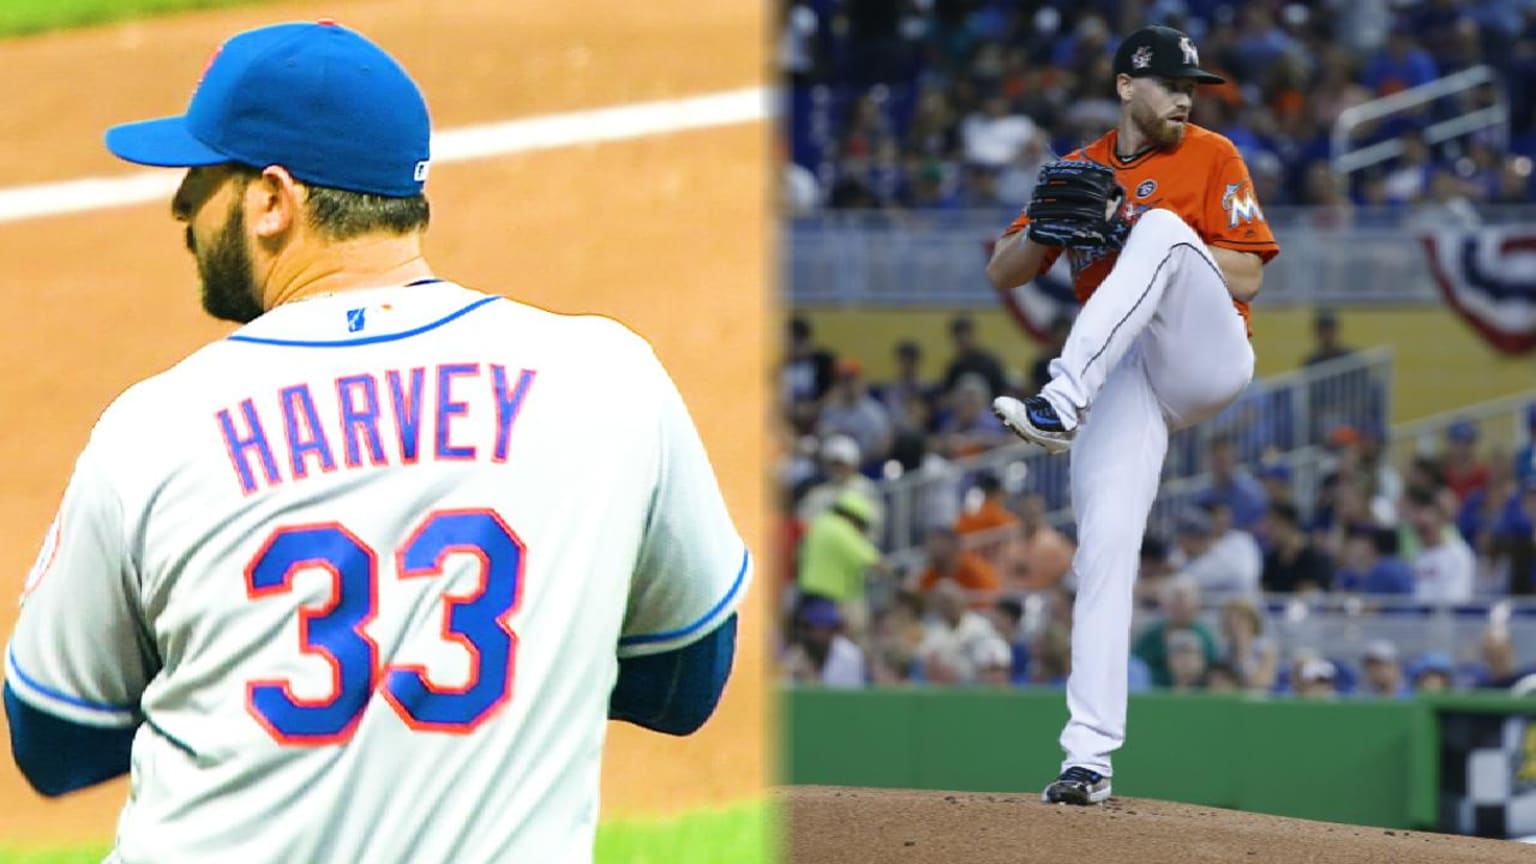 Rare NY Mets Jersey Mets Harvey Jersey NY Mets Jersey Majestic -  in  2023